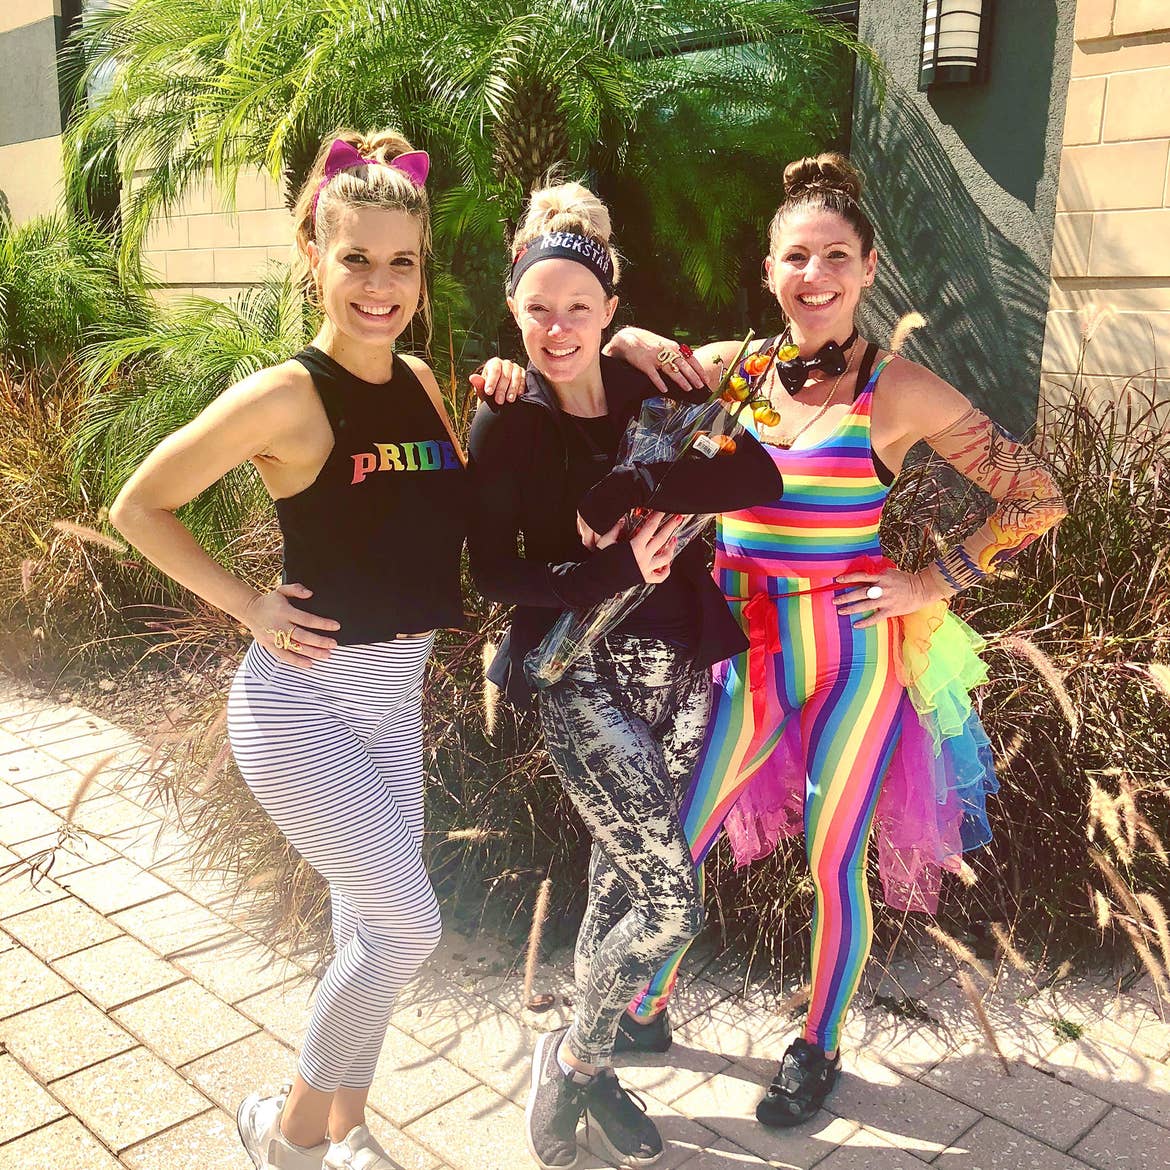 From left to right: Co-authors, Jessica, Molly and Christine wear PRIDE-inspired outfits together outdoors.